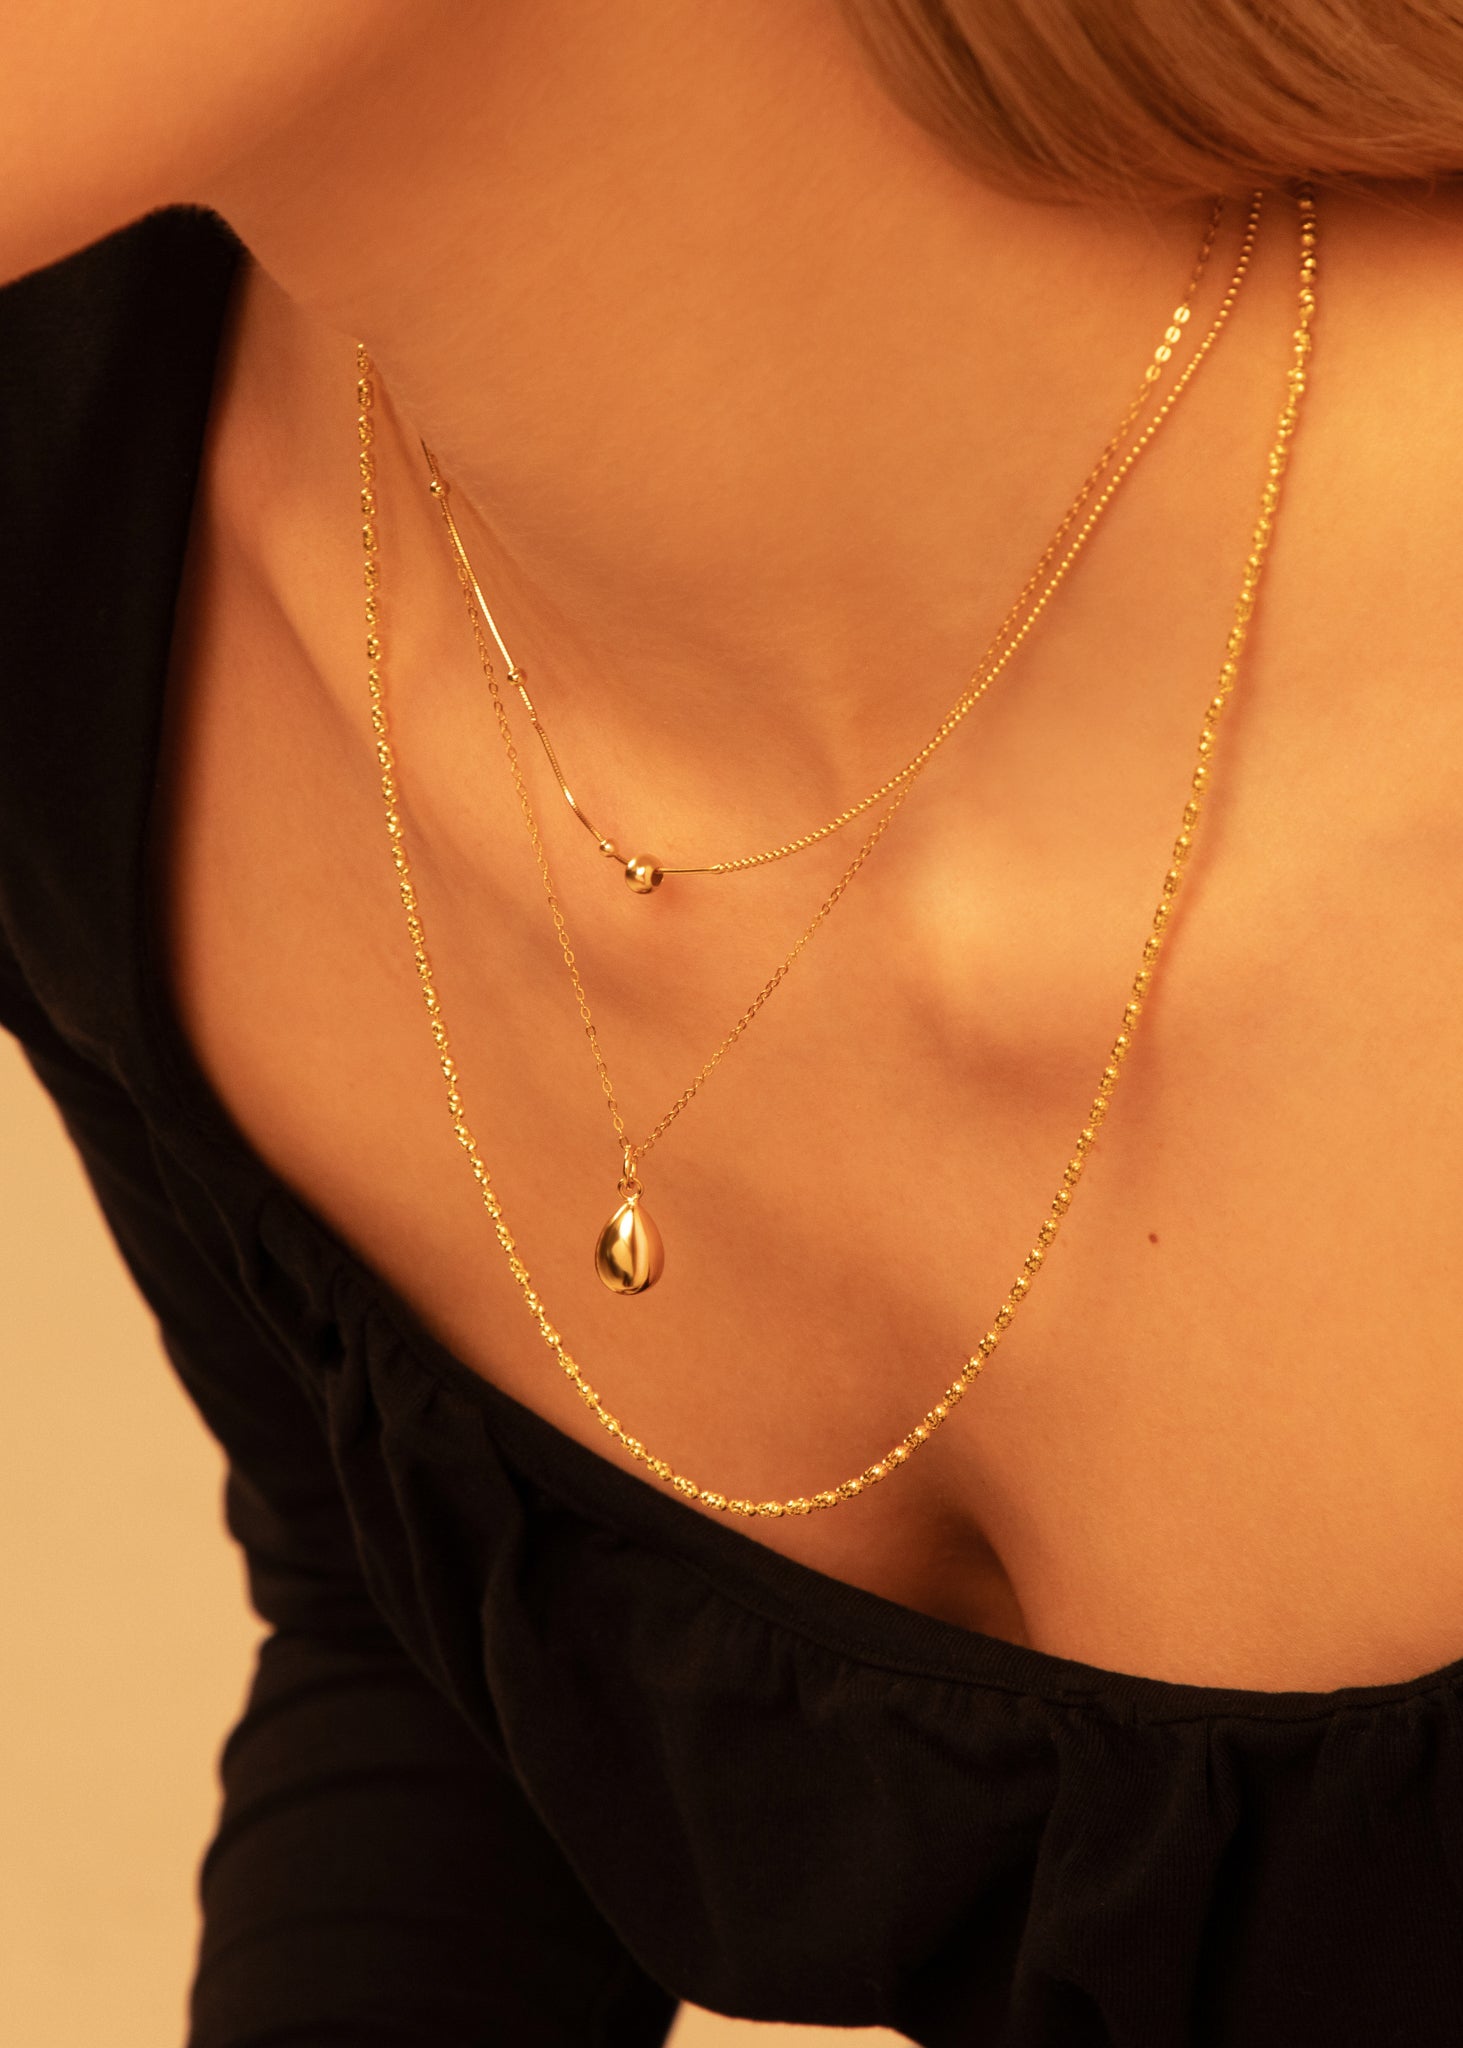 Gold droplets necklace